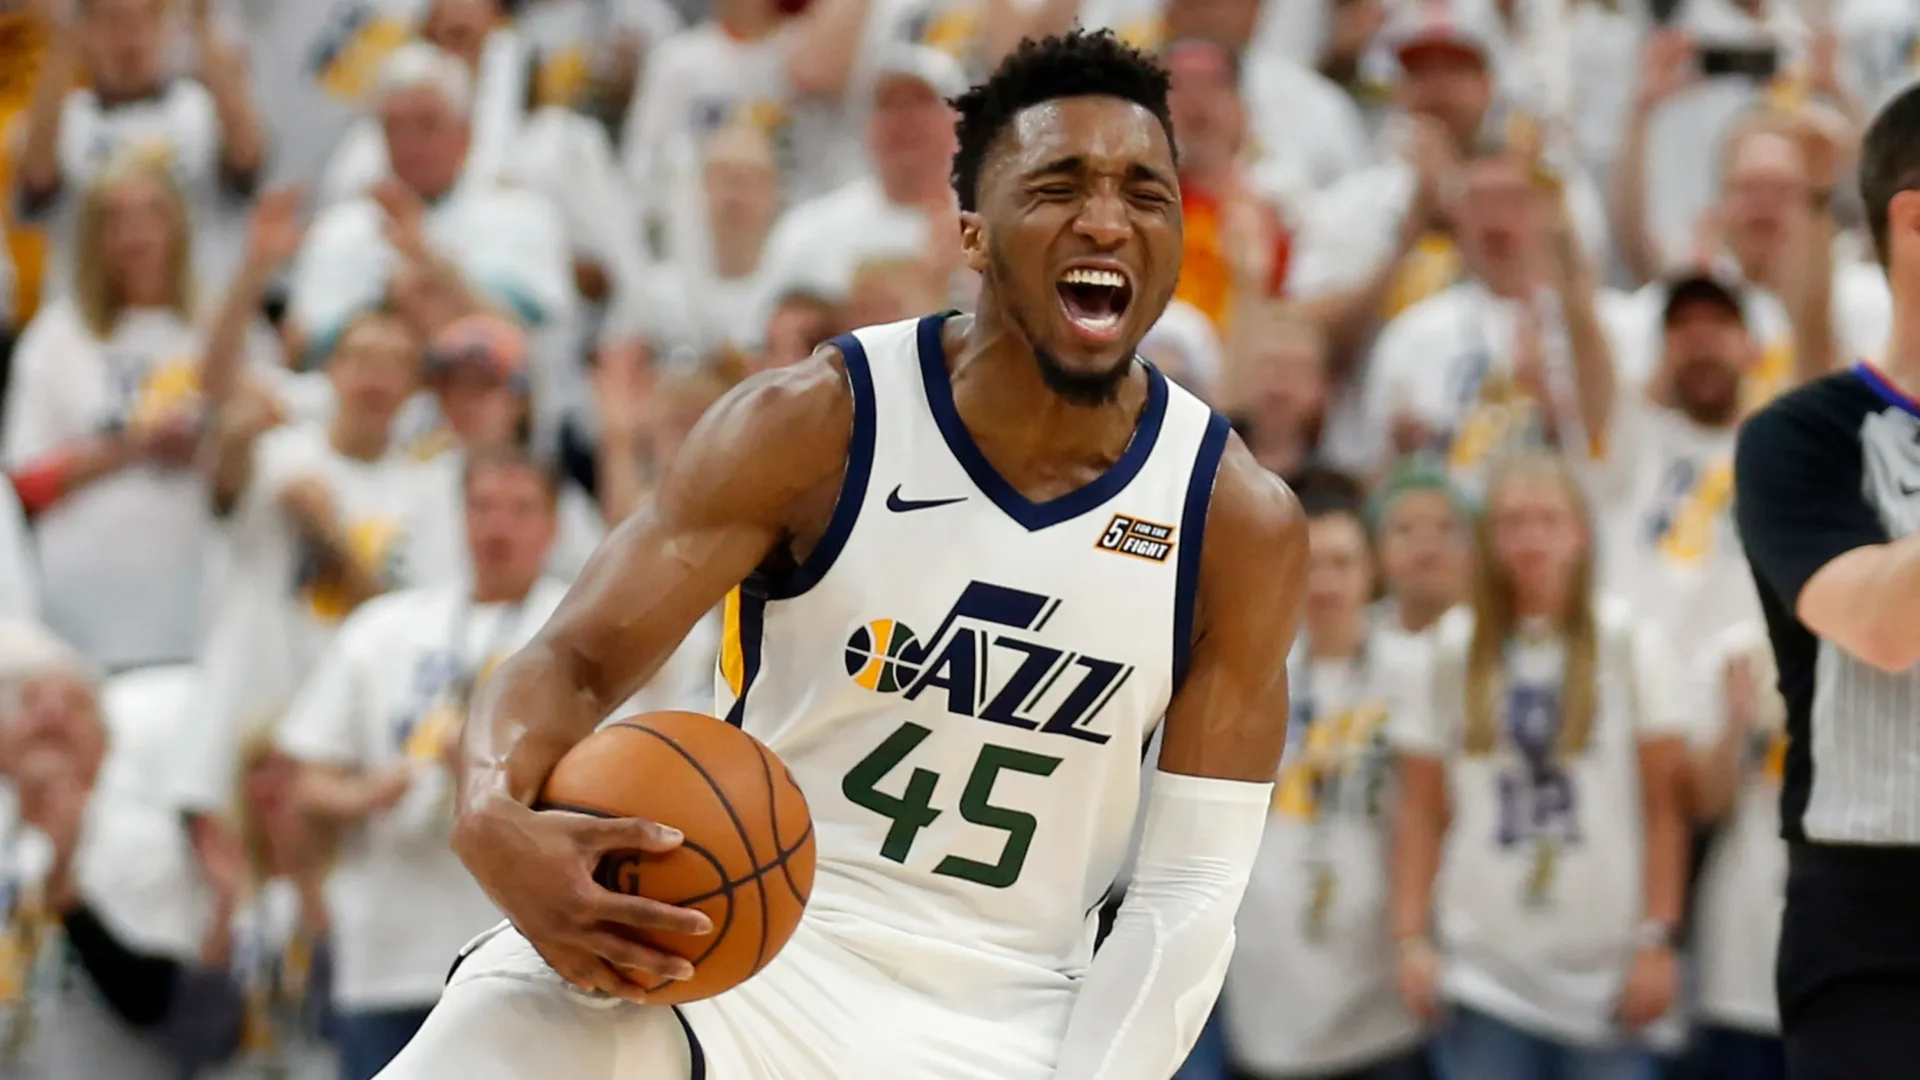 Donovan Mitchell: A Rising Star on and off the Court